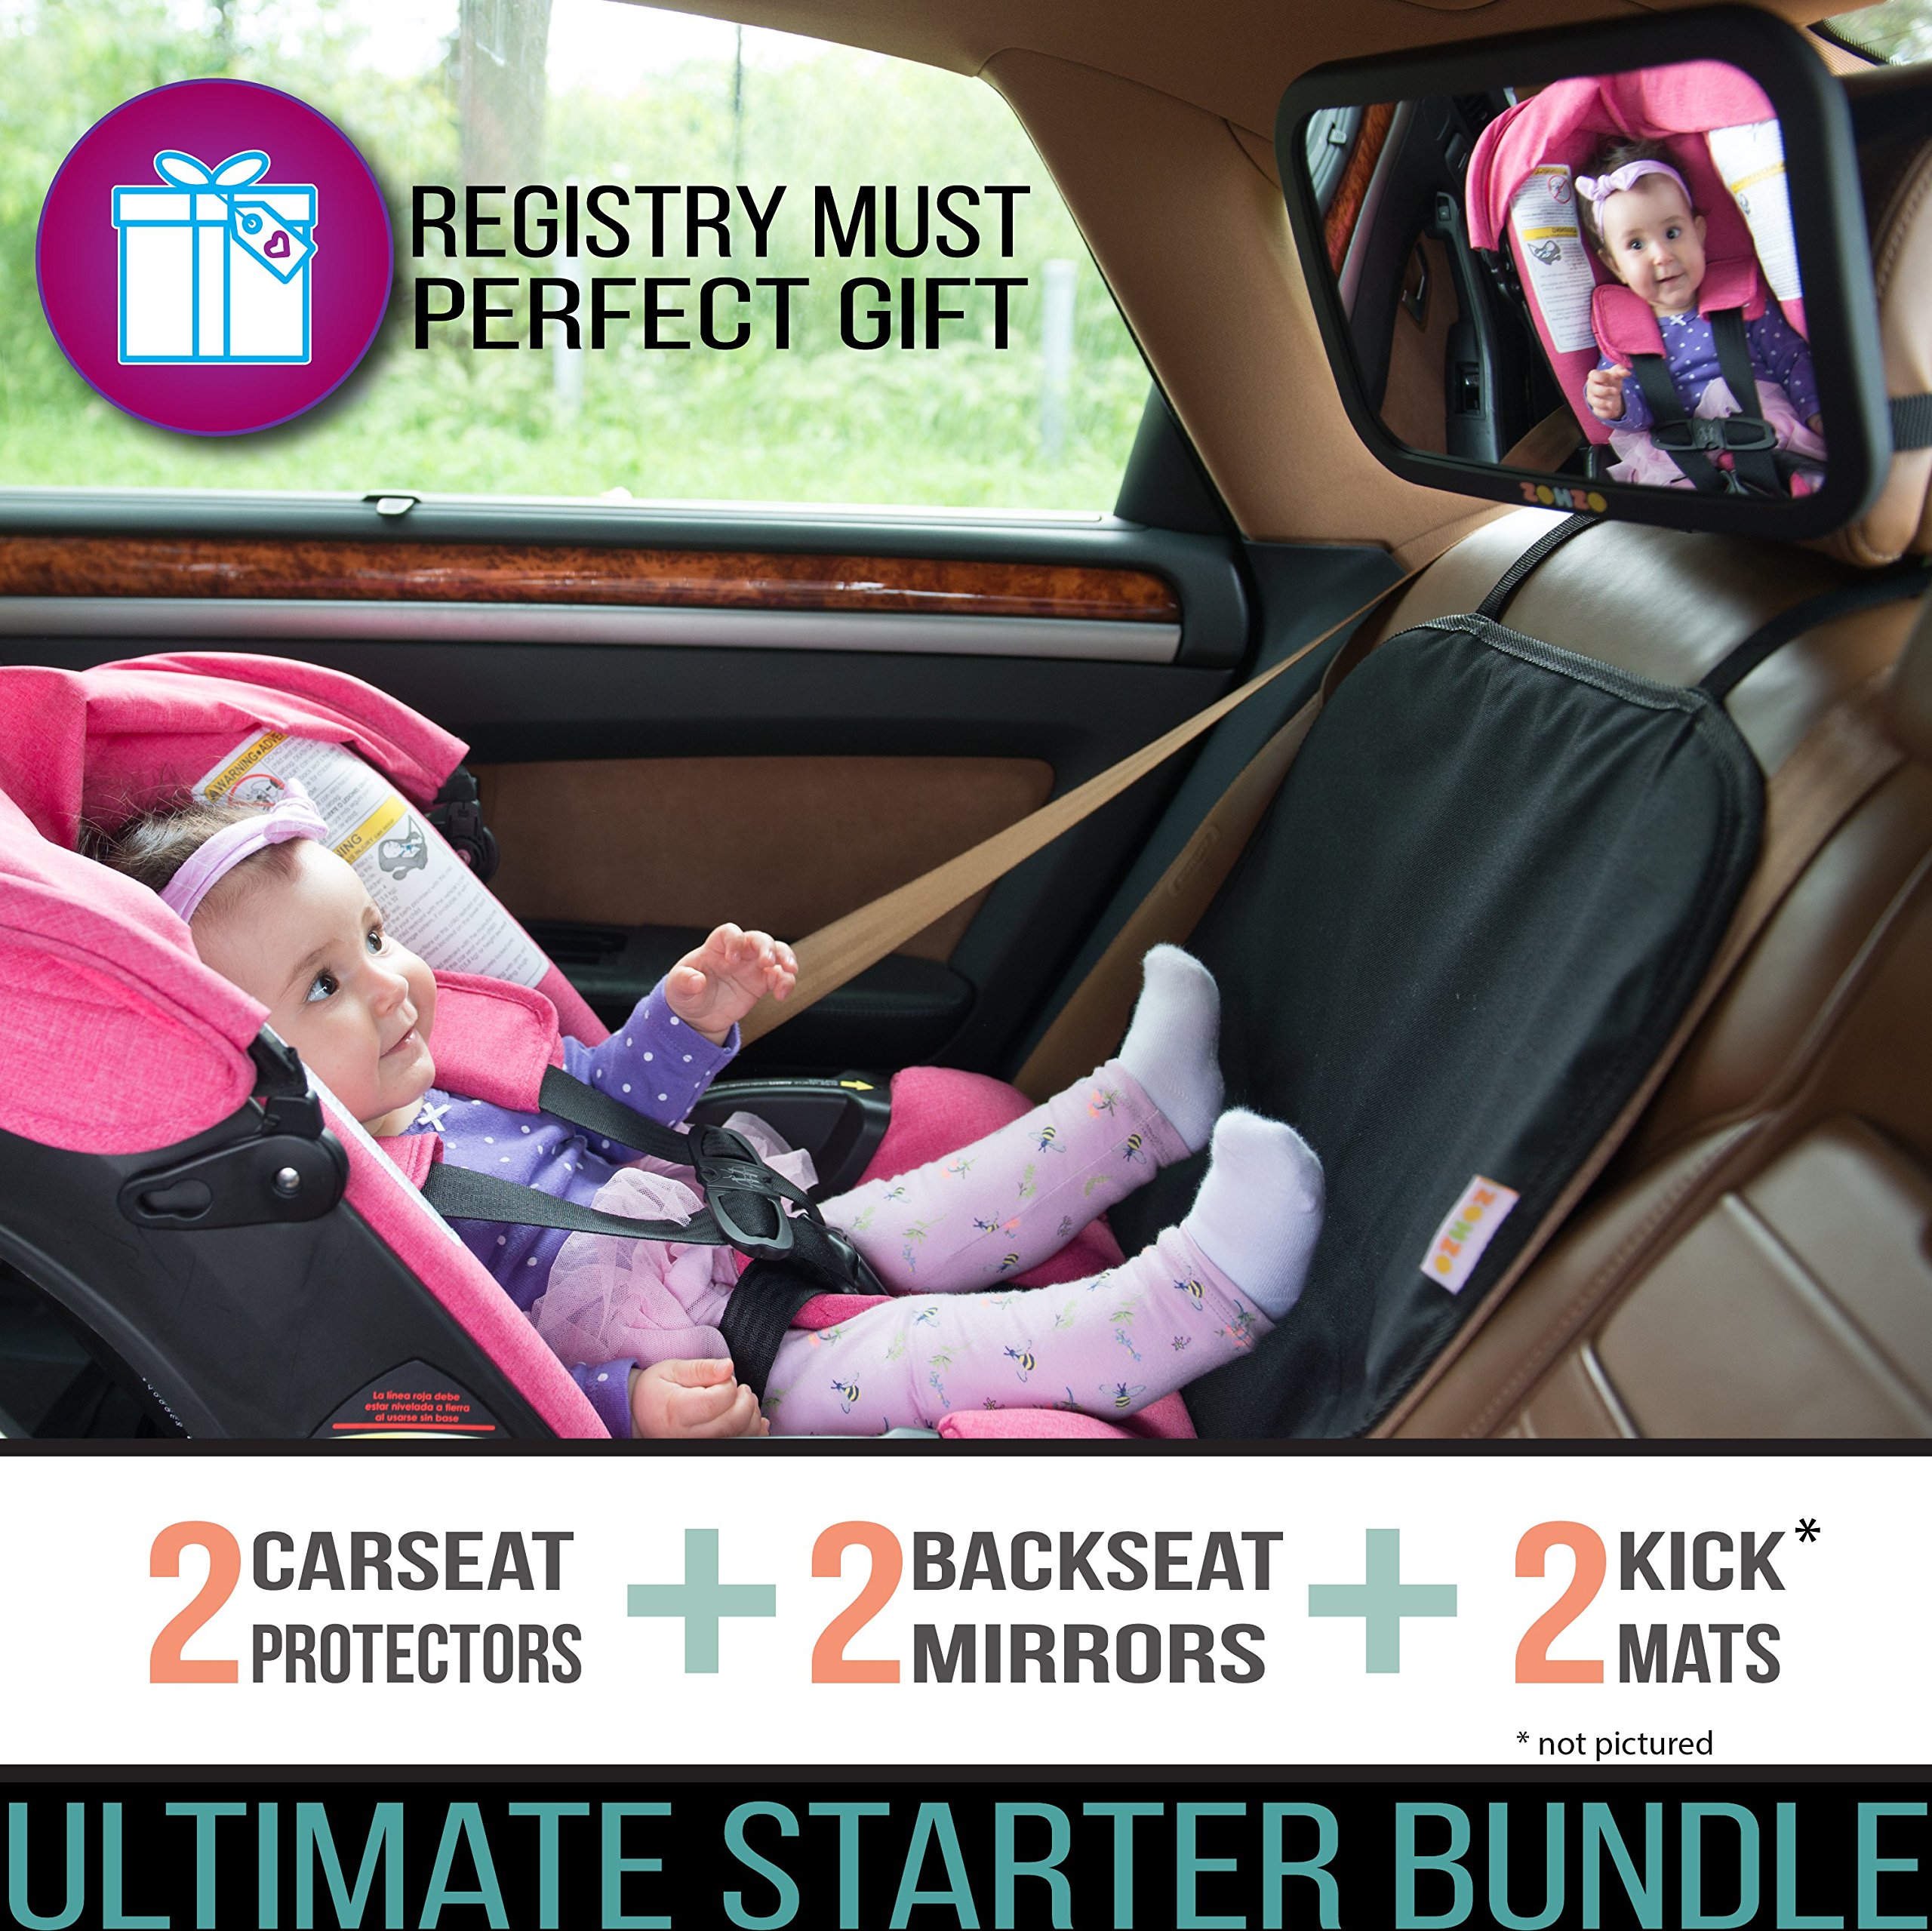 Zohzo Double Baby Car Bundle - Car Seat Protector Cover, Baby Car Mirror, Kick Mat Organizer for Baby Shower, New Infants, and Rear Facing Car Seats